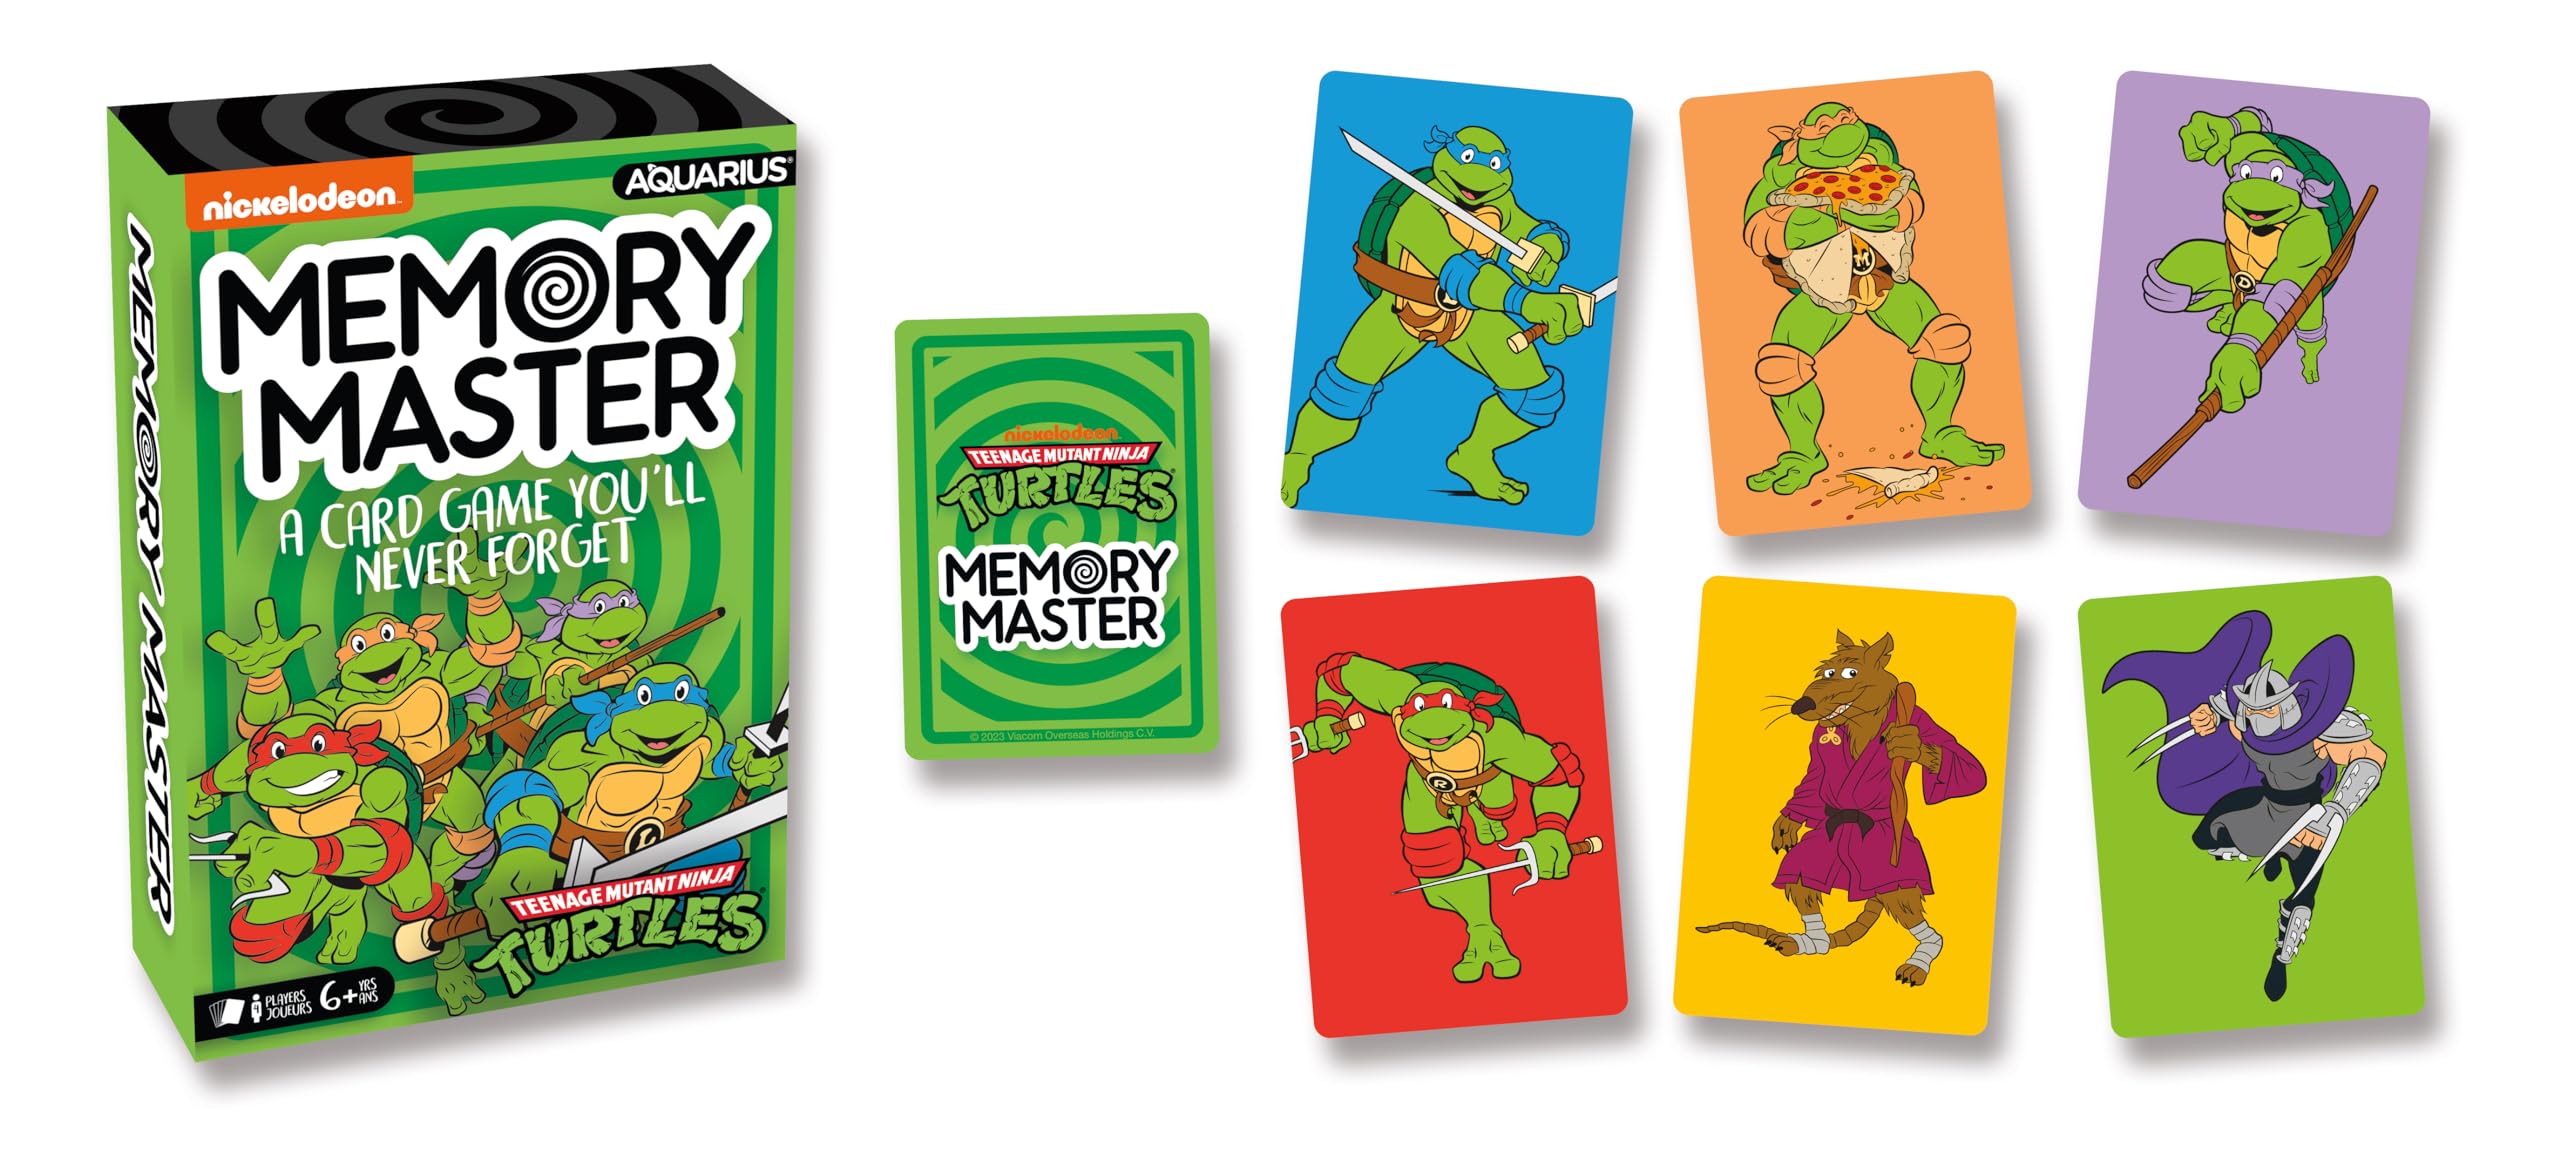 AQUARIUS Teenage Mutant Ninja Turtles Memory Master Card Game - Fun Family Party Game for Kids, Teens & Adults - Entertaining Game Night Gift - Officially Licensed TMNT Merchandise